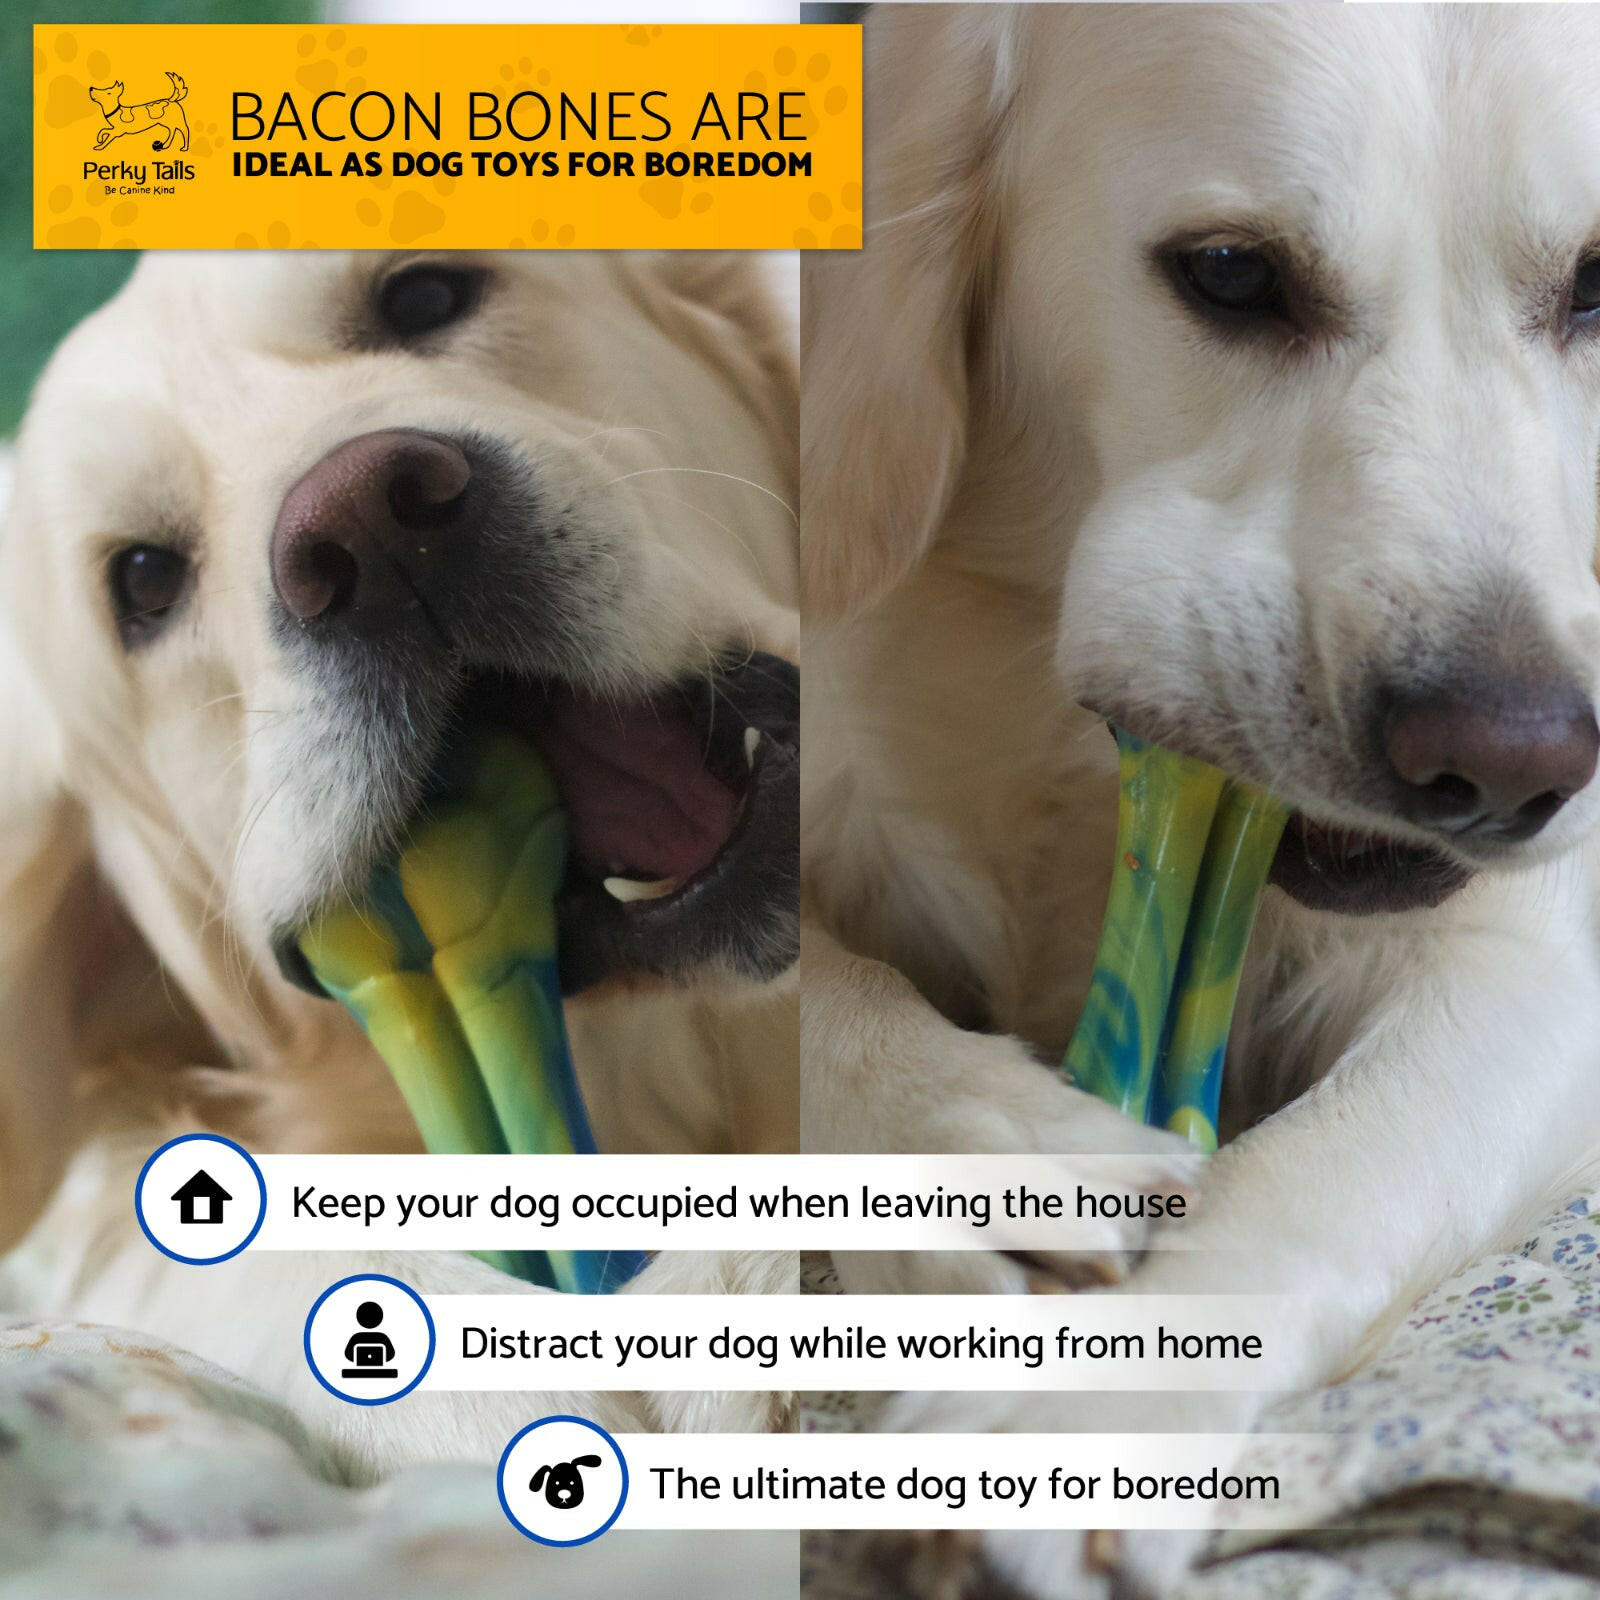 Durable Nylon Bone Chew Toys: Ideal for Aggressive Chewers